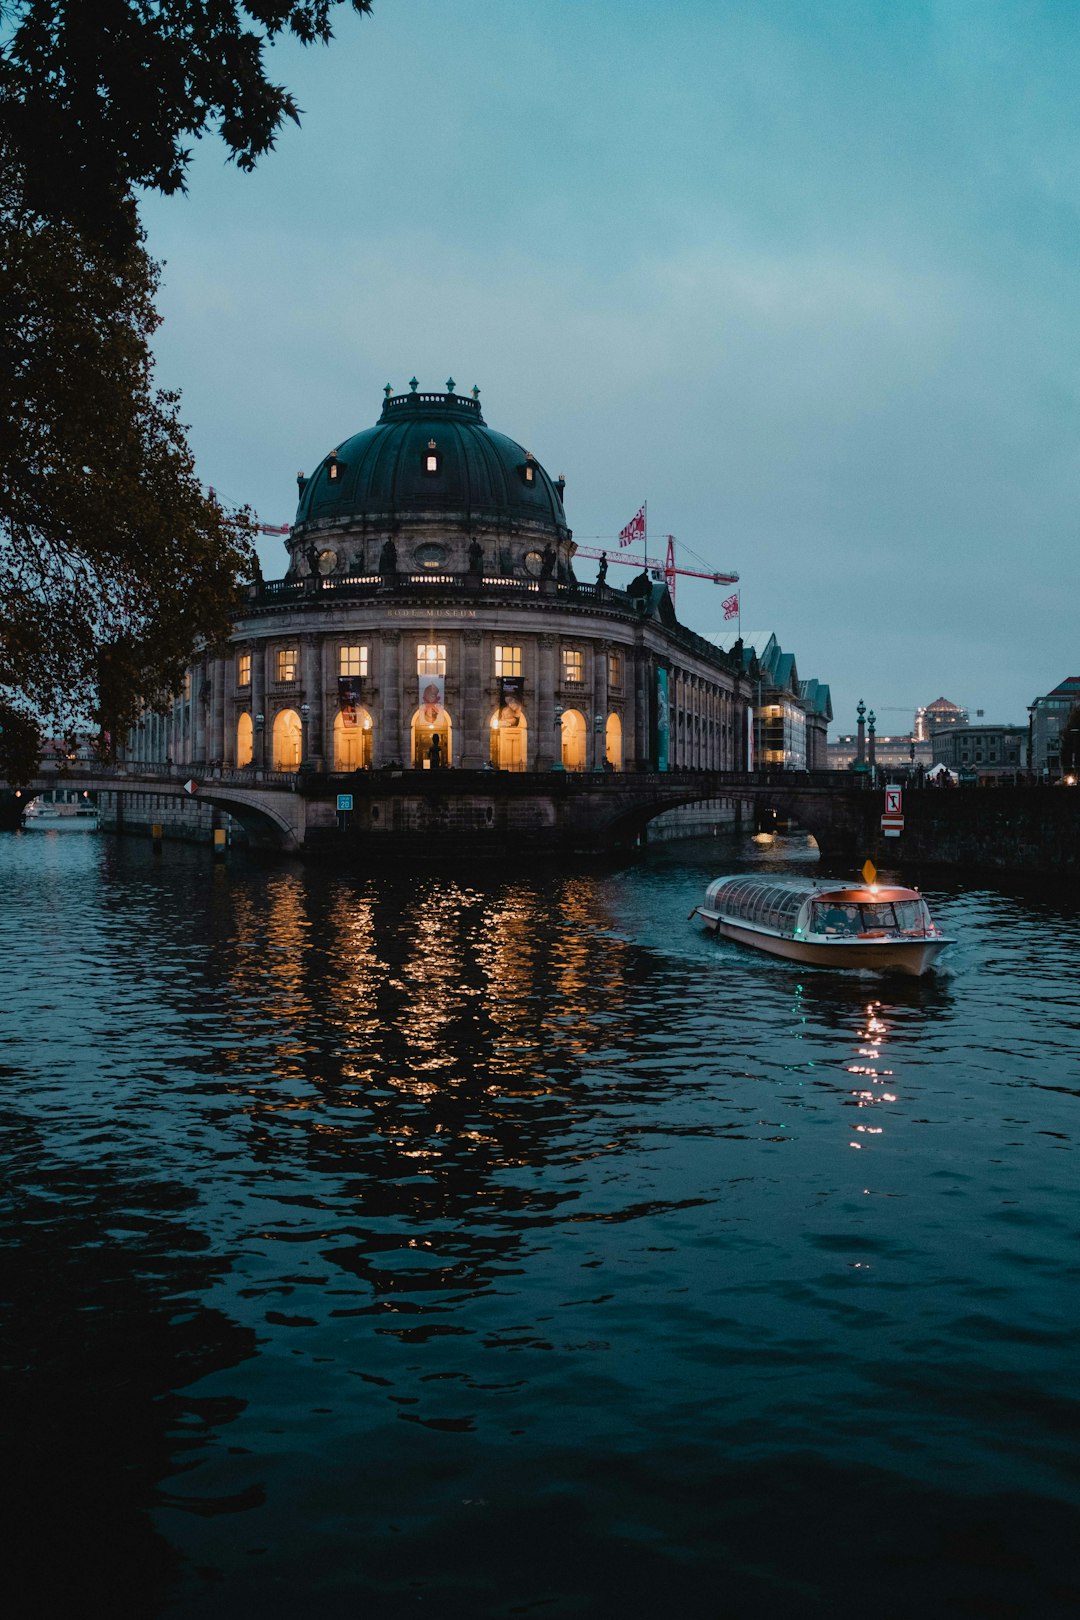 Travel Tips and Stories of Bode Museum in Germany